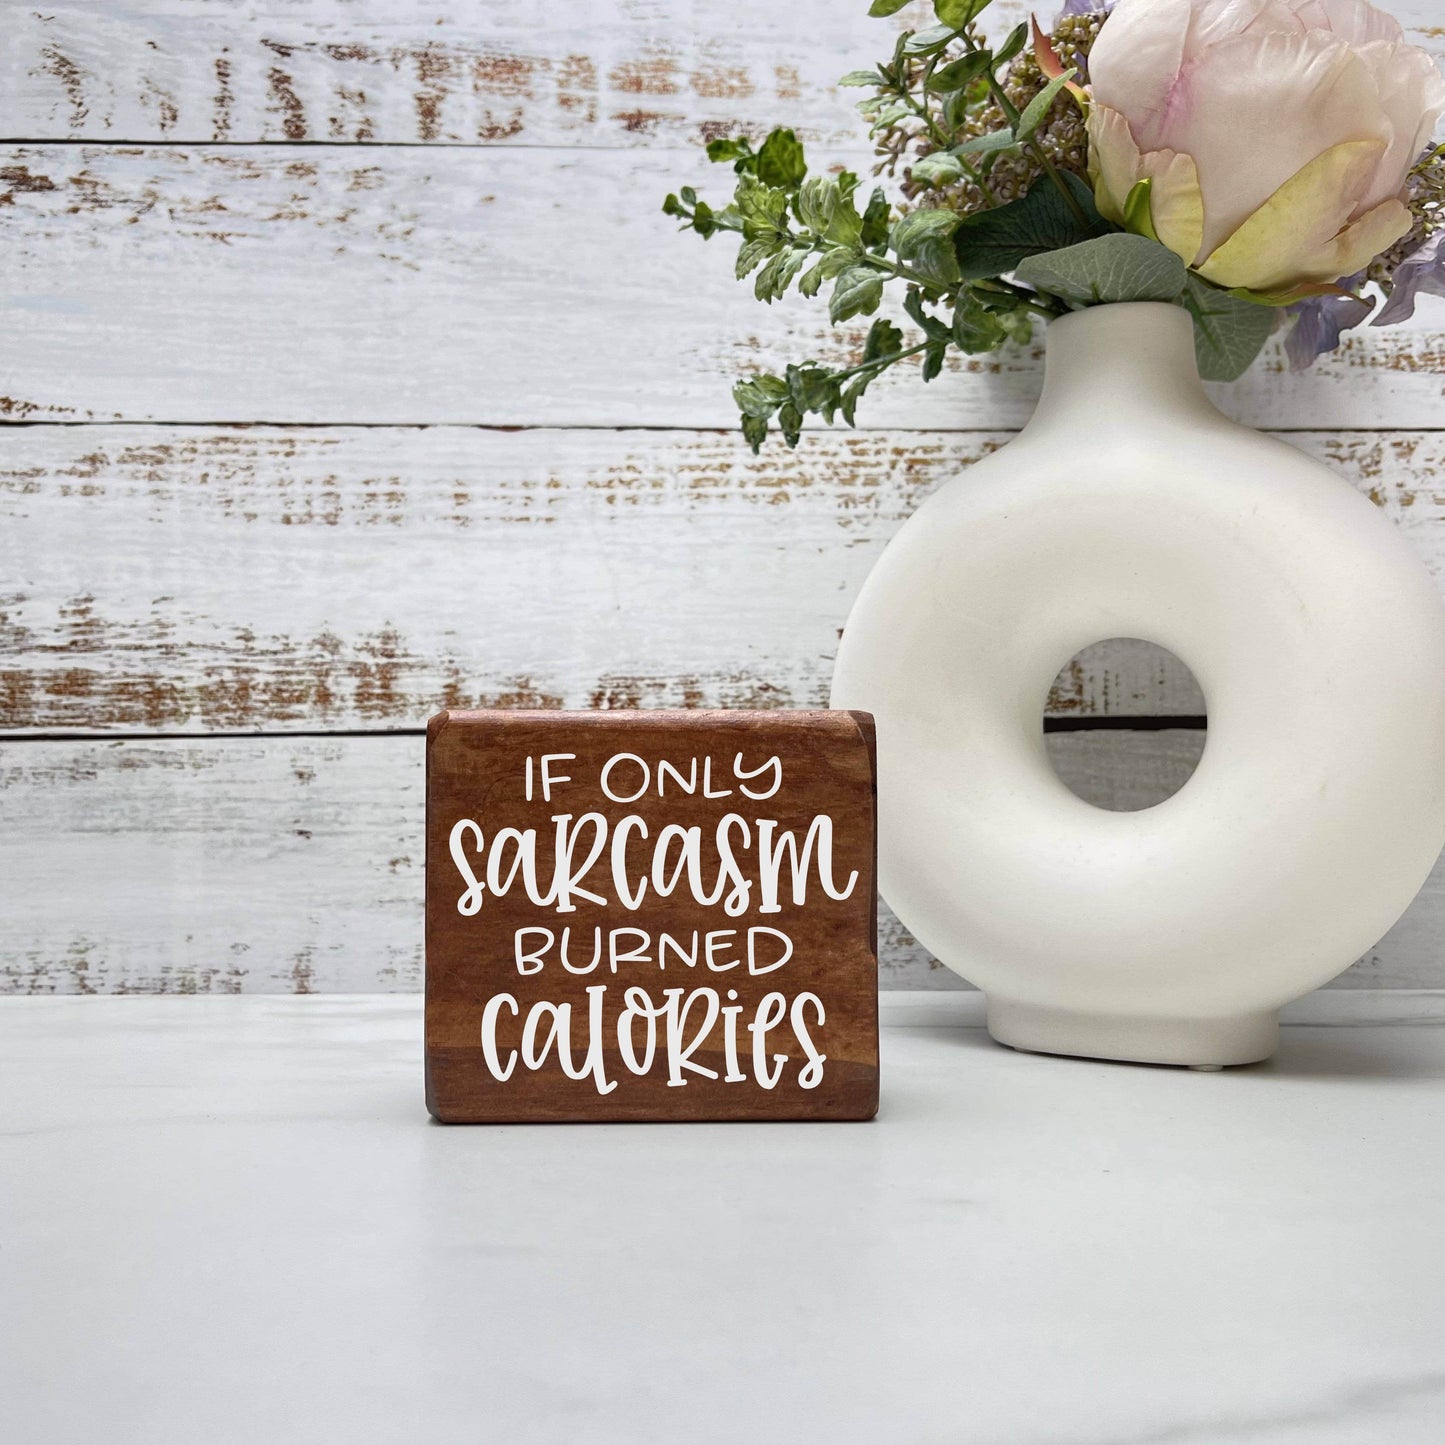 If only Sarcasm Burnt Calories wood sign, quote sign, rustic decor, home decor